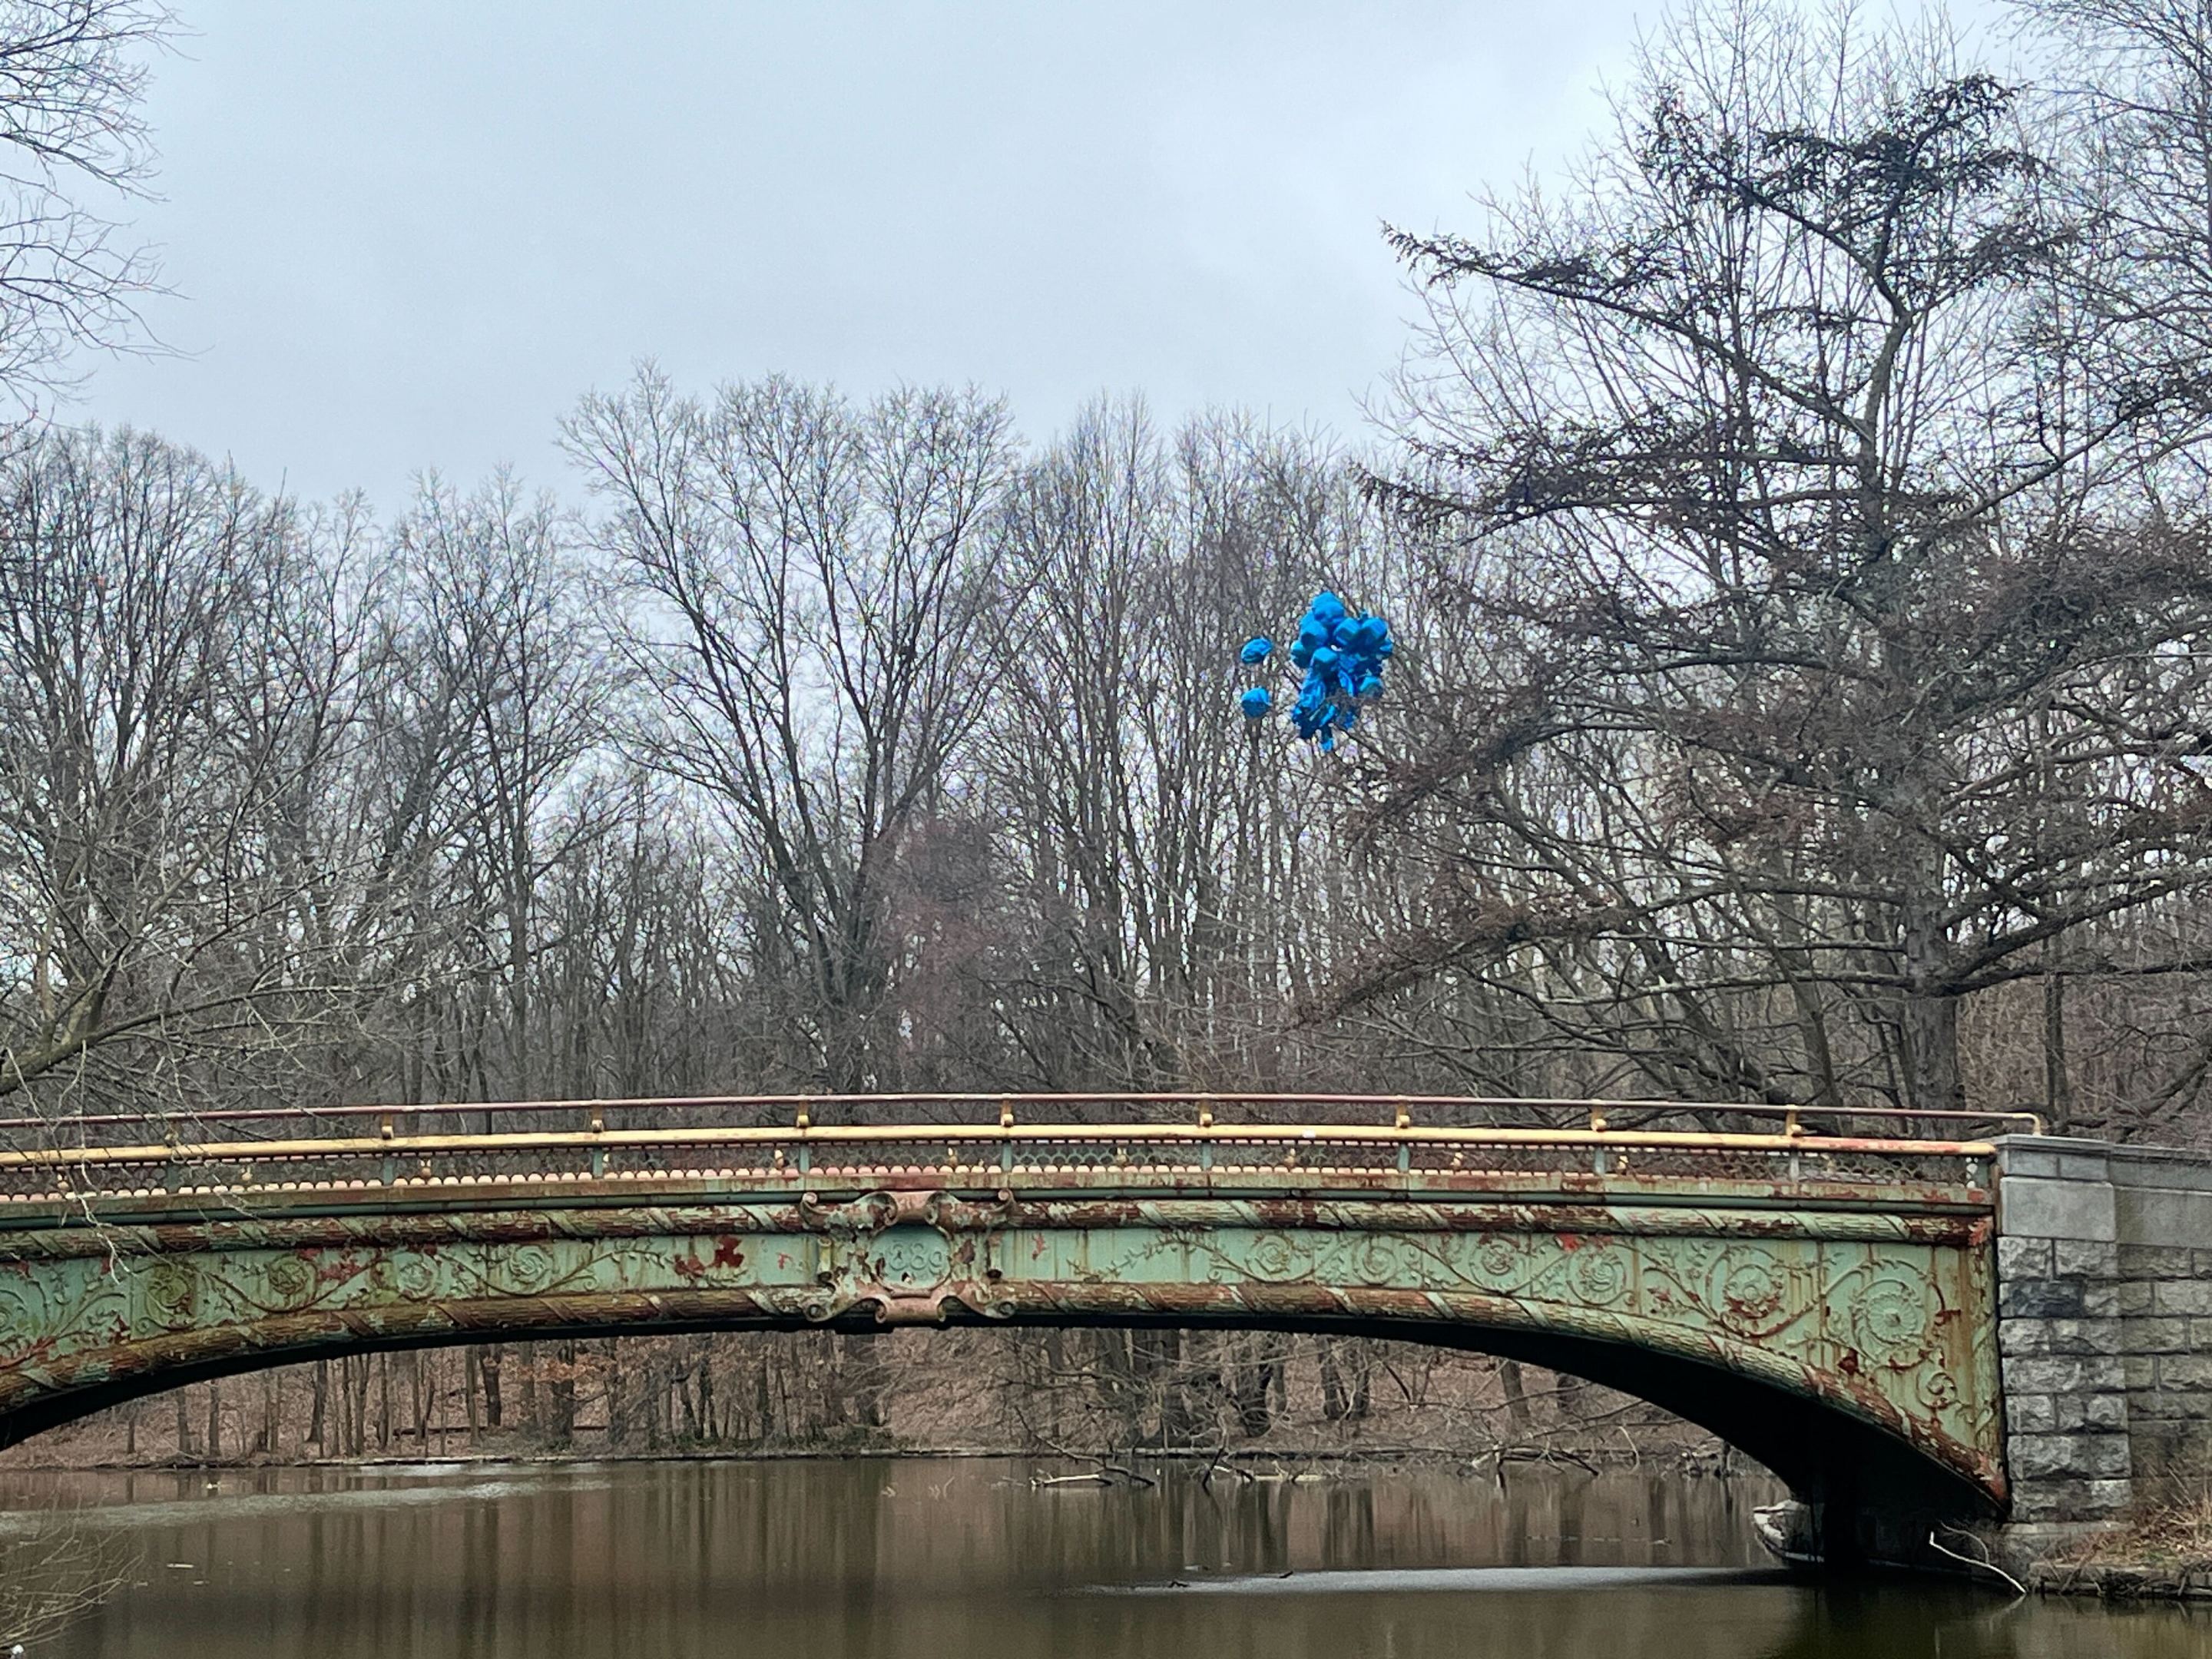 blue balloons stuck in a tree on an overcast day